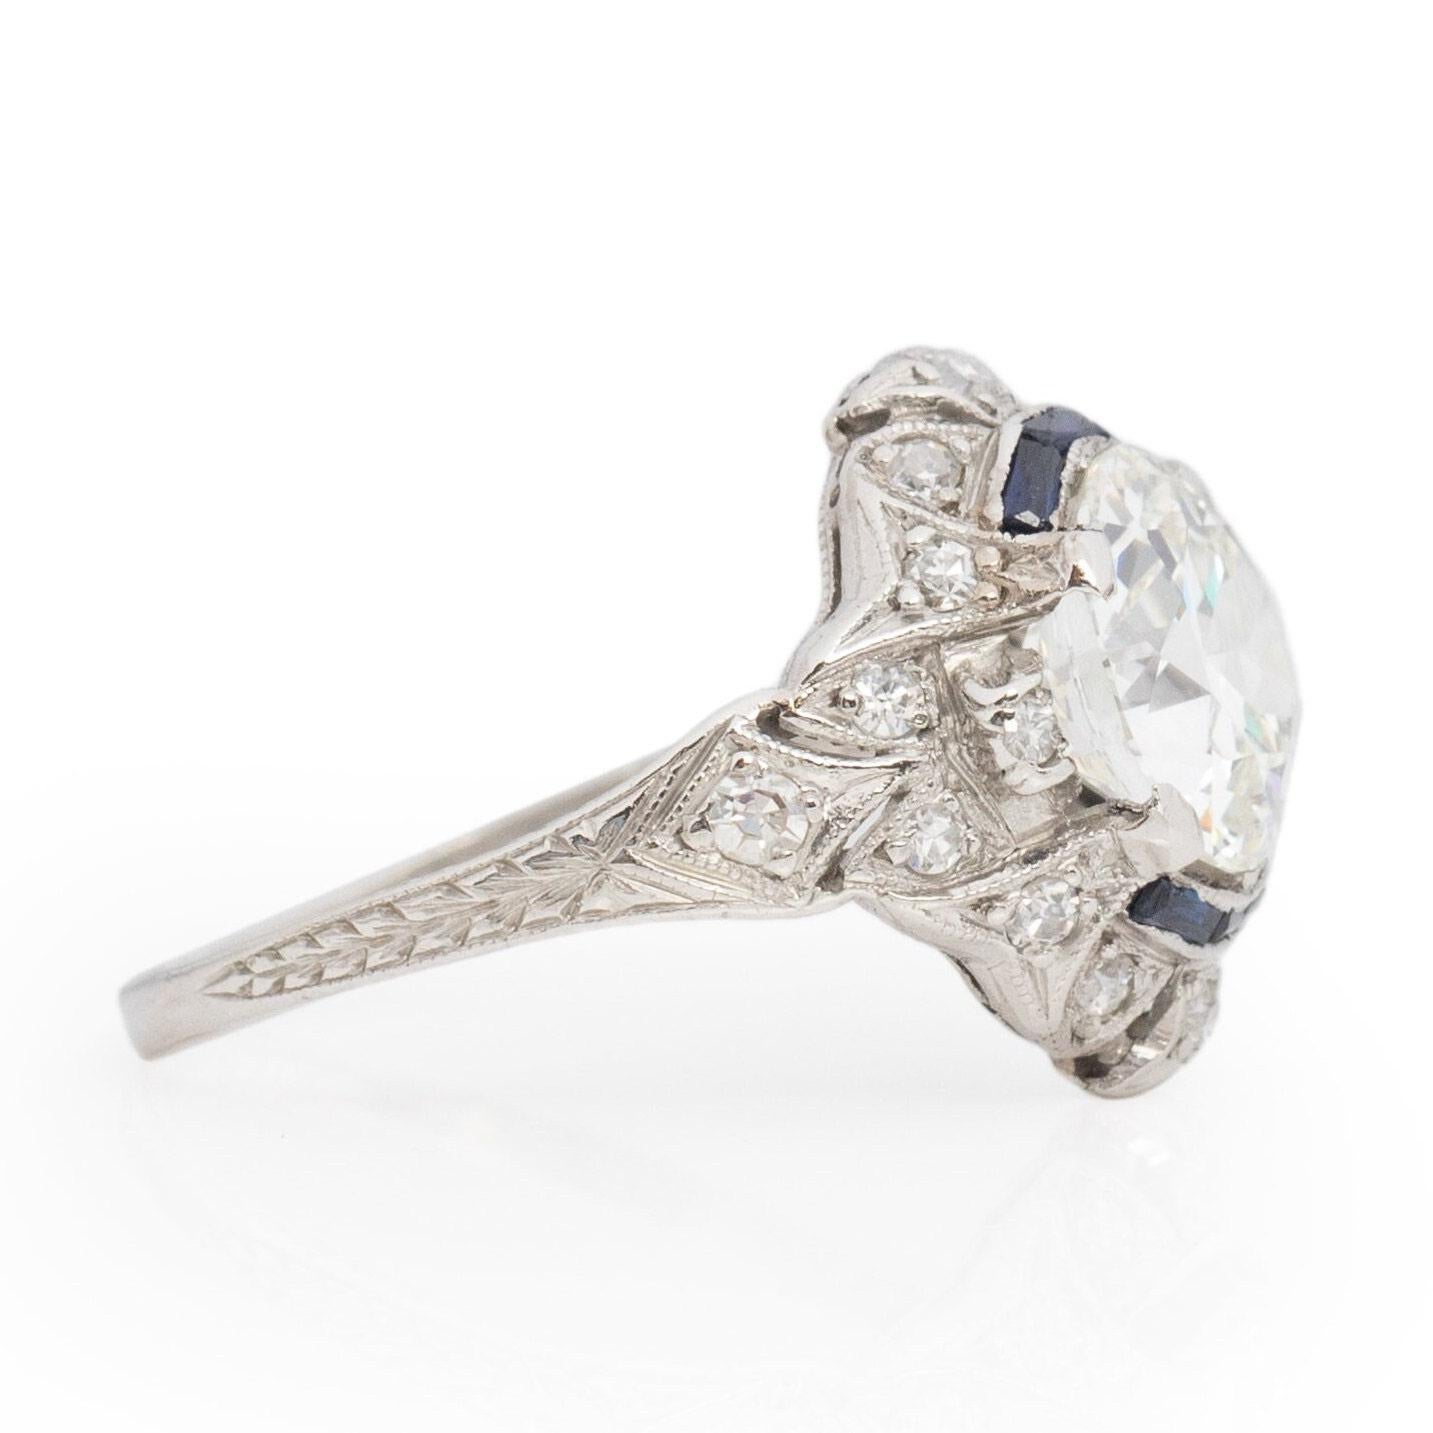 Circa 1910's Edwardian Platinum 2.34Ct Old European Cut Diamond & Sapphire Ring In Good Condition For Sale In Addison, TX